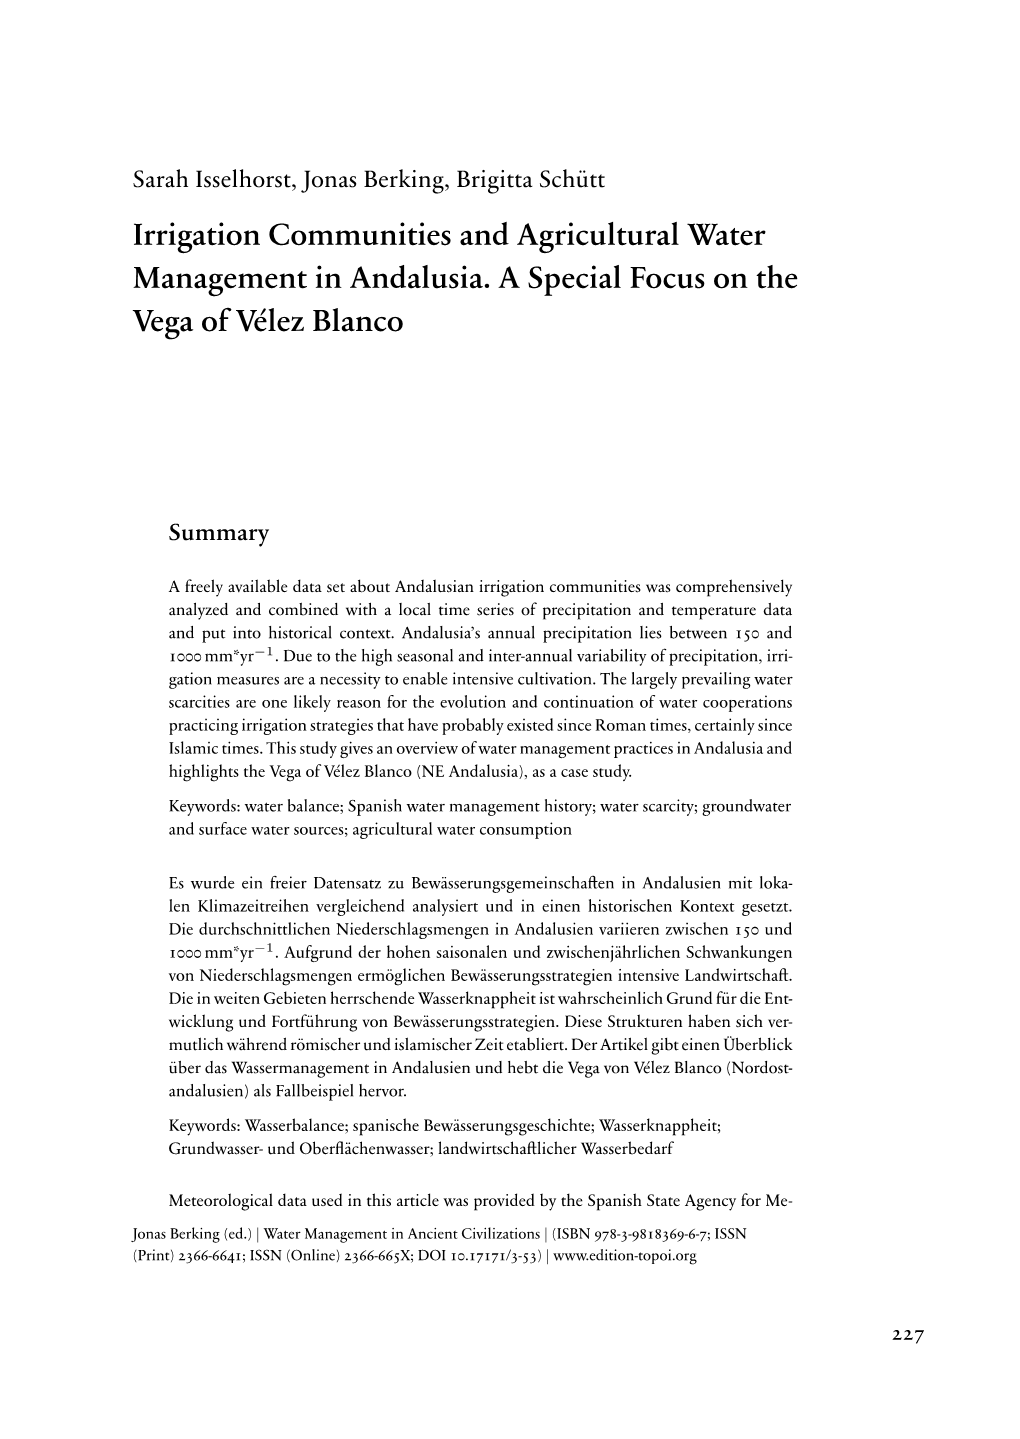 Irrigation Communities and Agricultural Water Management in Andalusia